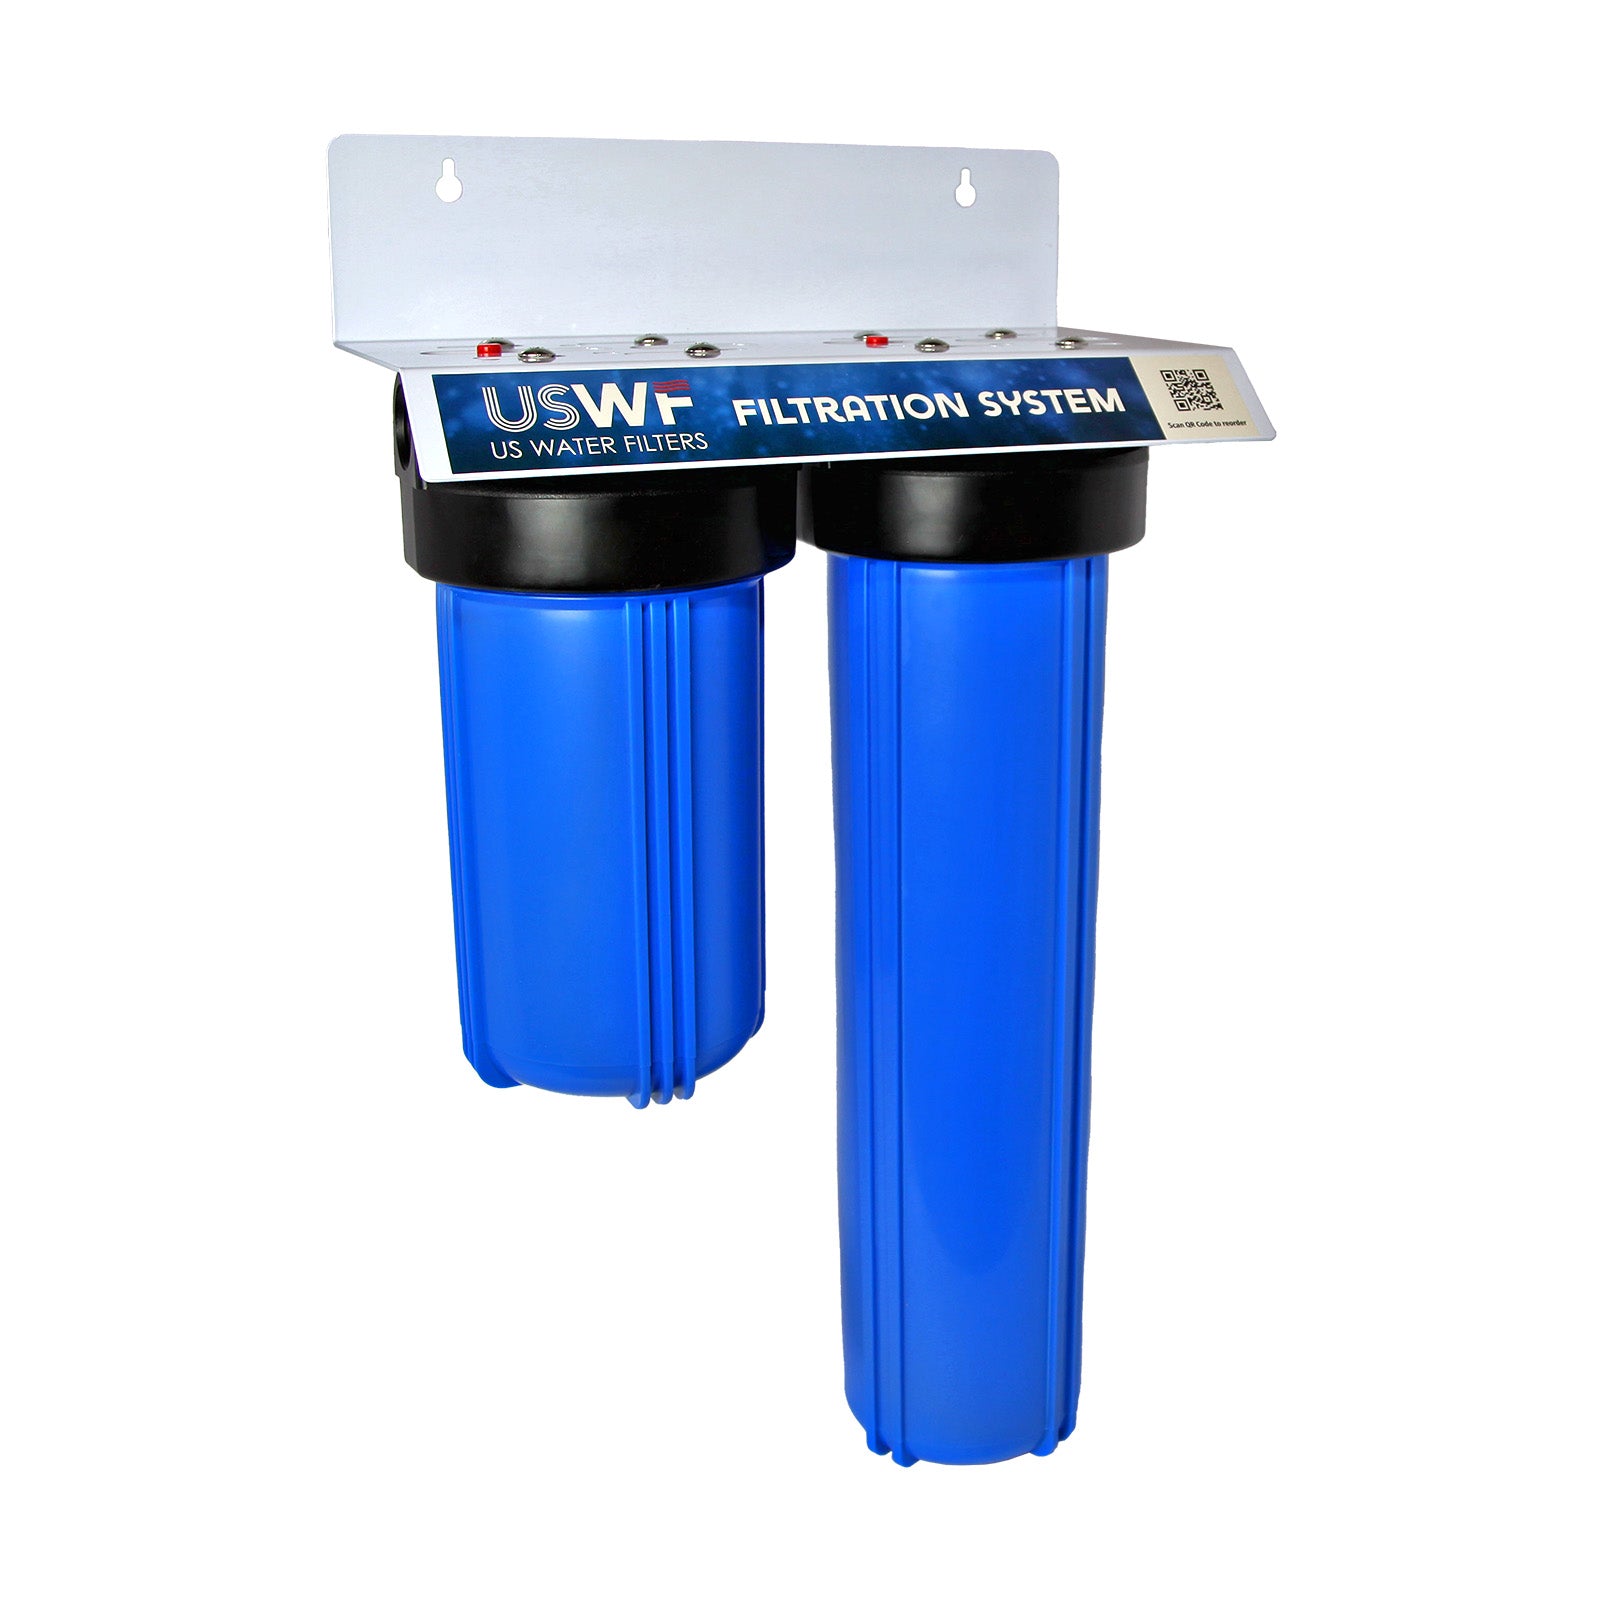 2-Stage Heavy Sediment Reduction Whole House Water Filtration System by USWF, Pleated Sediment and Meltblown Sediment, 3/4" Inlet/Outlet